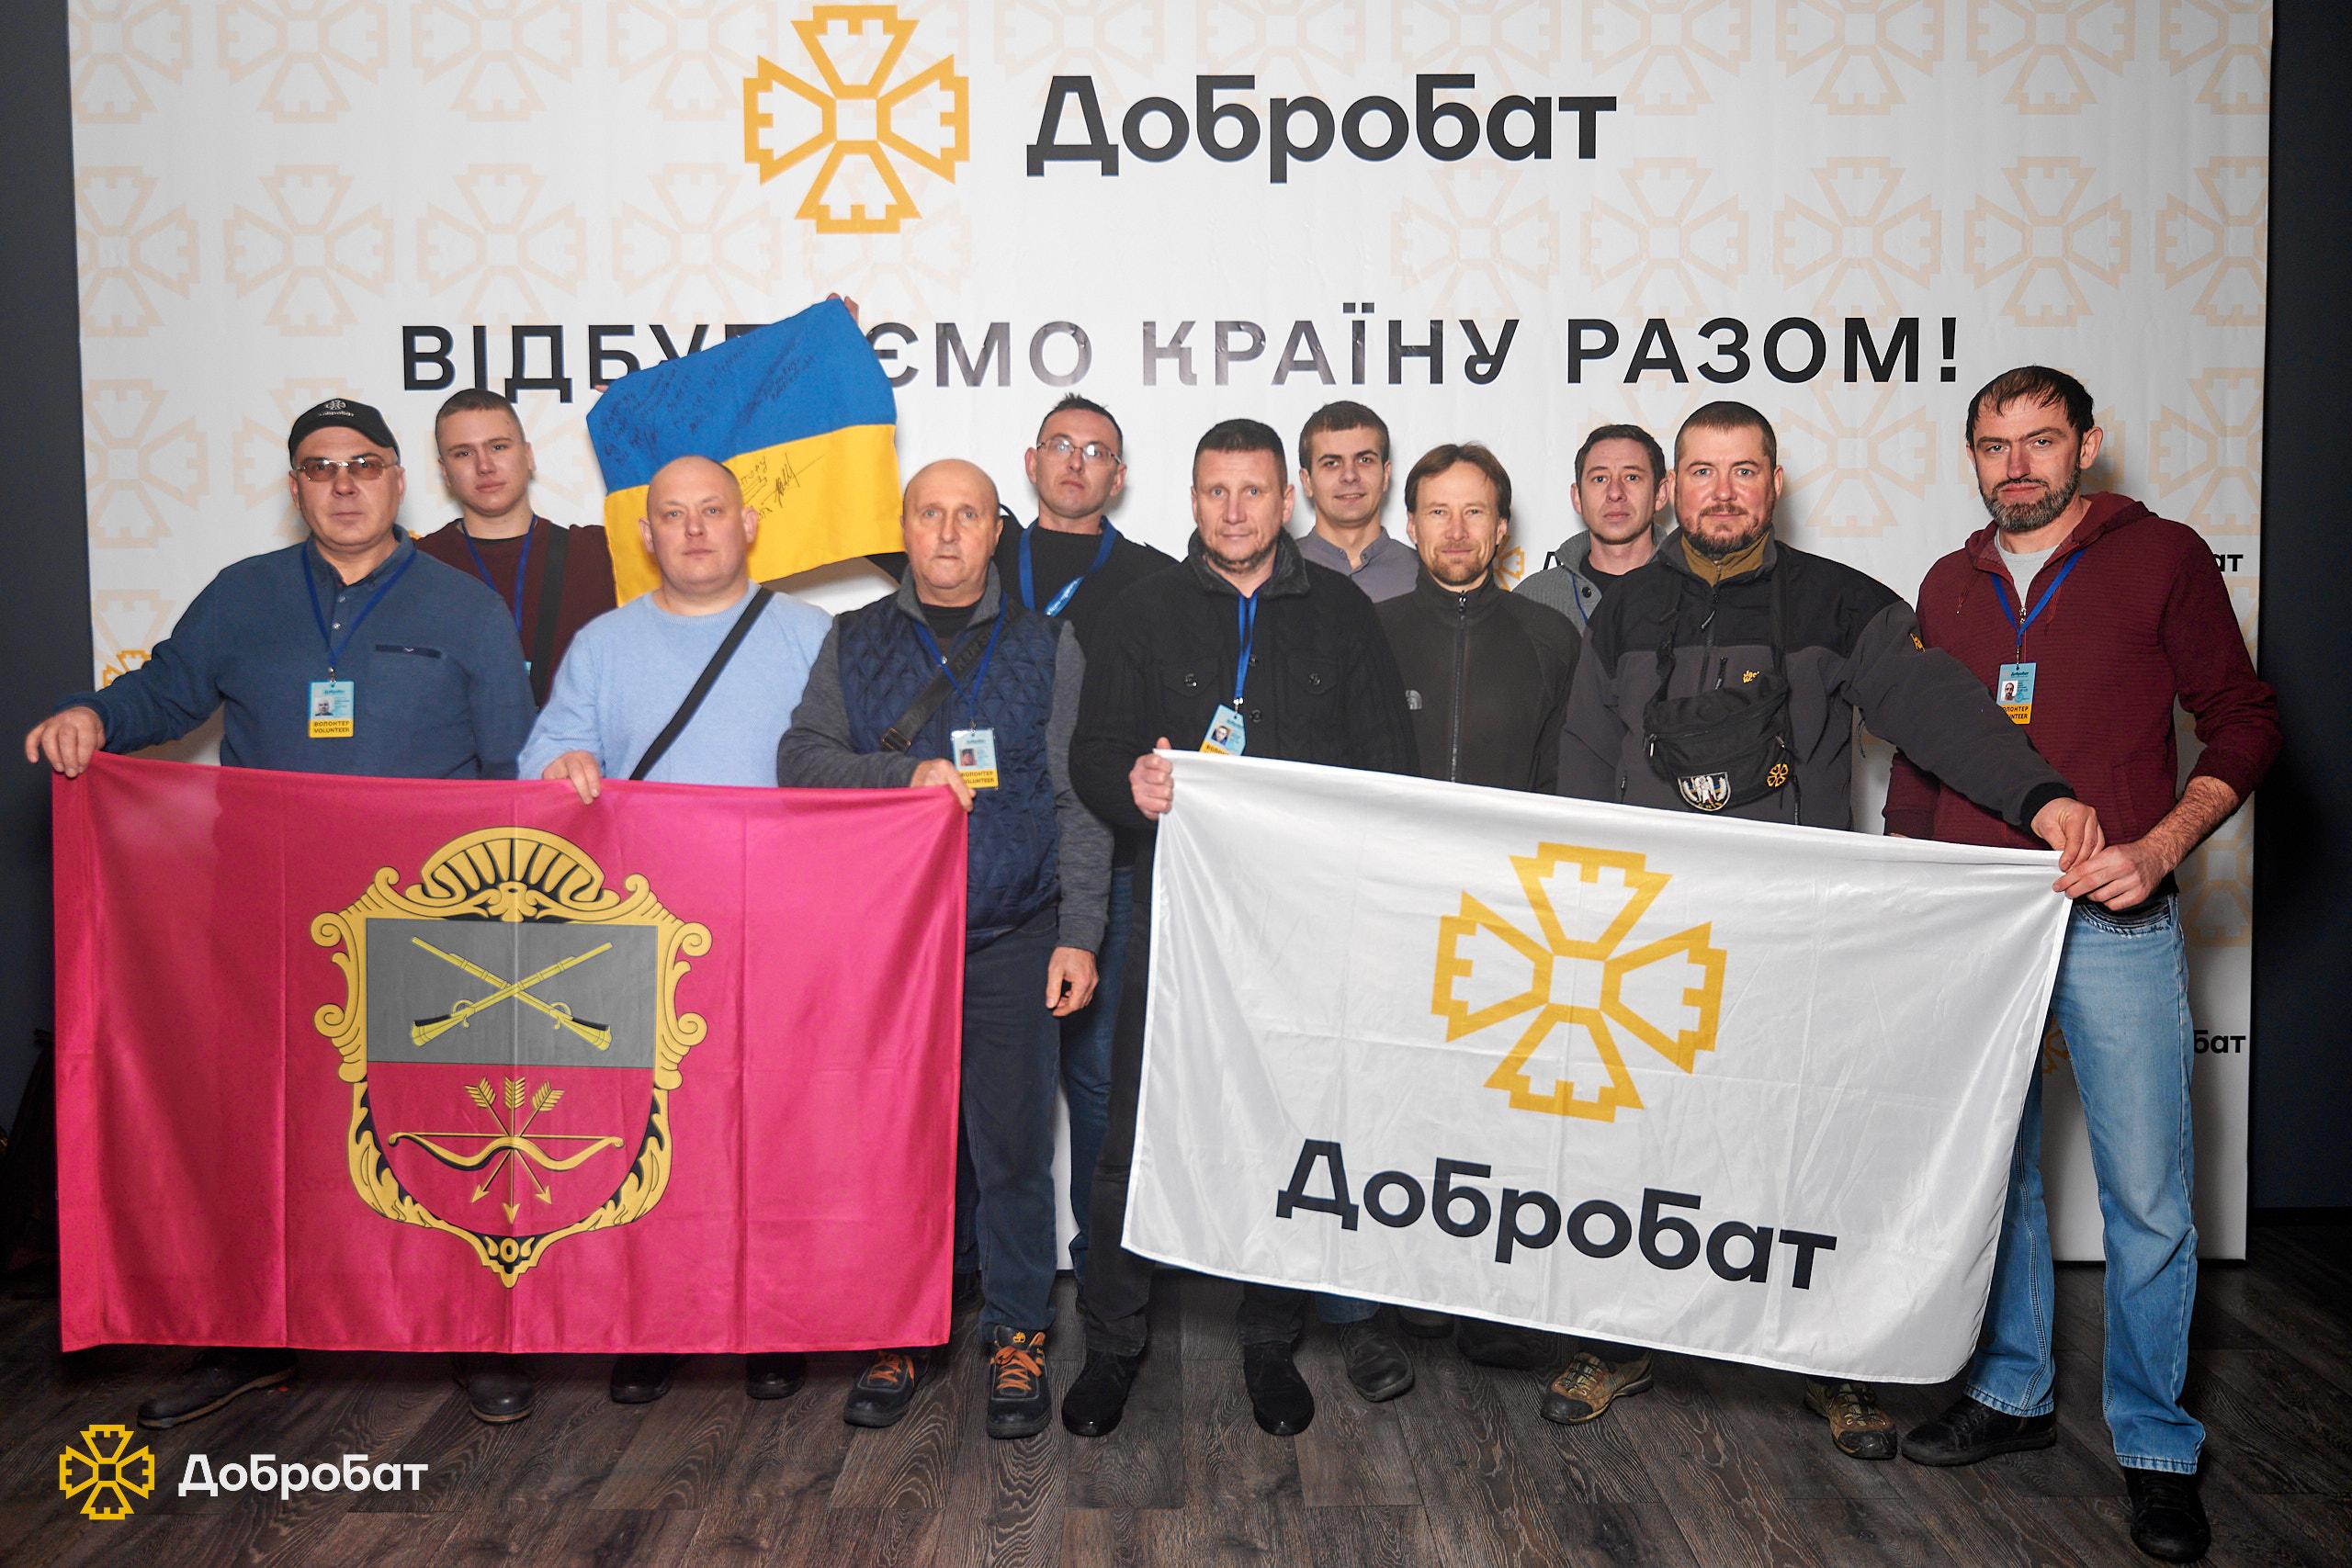 A heartwarming meeting, awarding of volunteers and tireless restoration of seven oblasts of the country: this was the week of Dobrobat